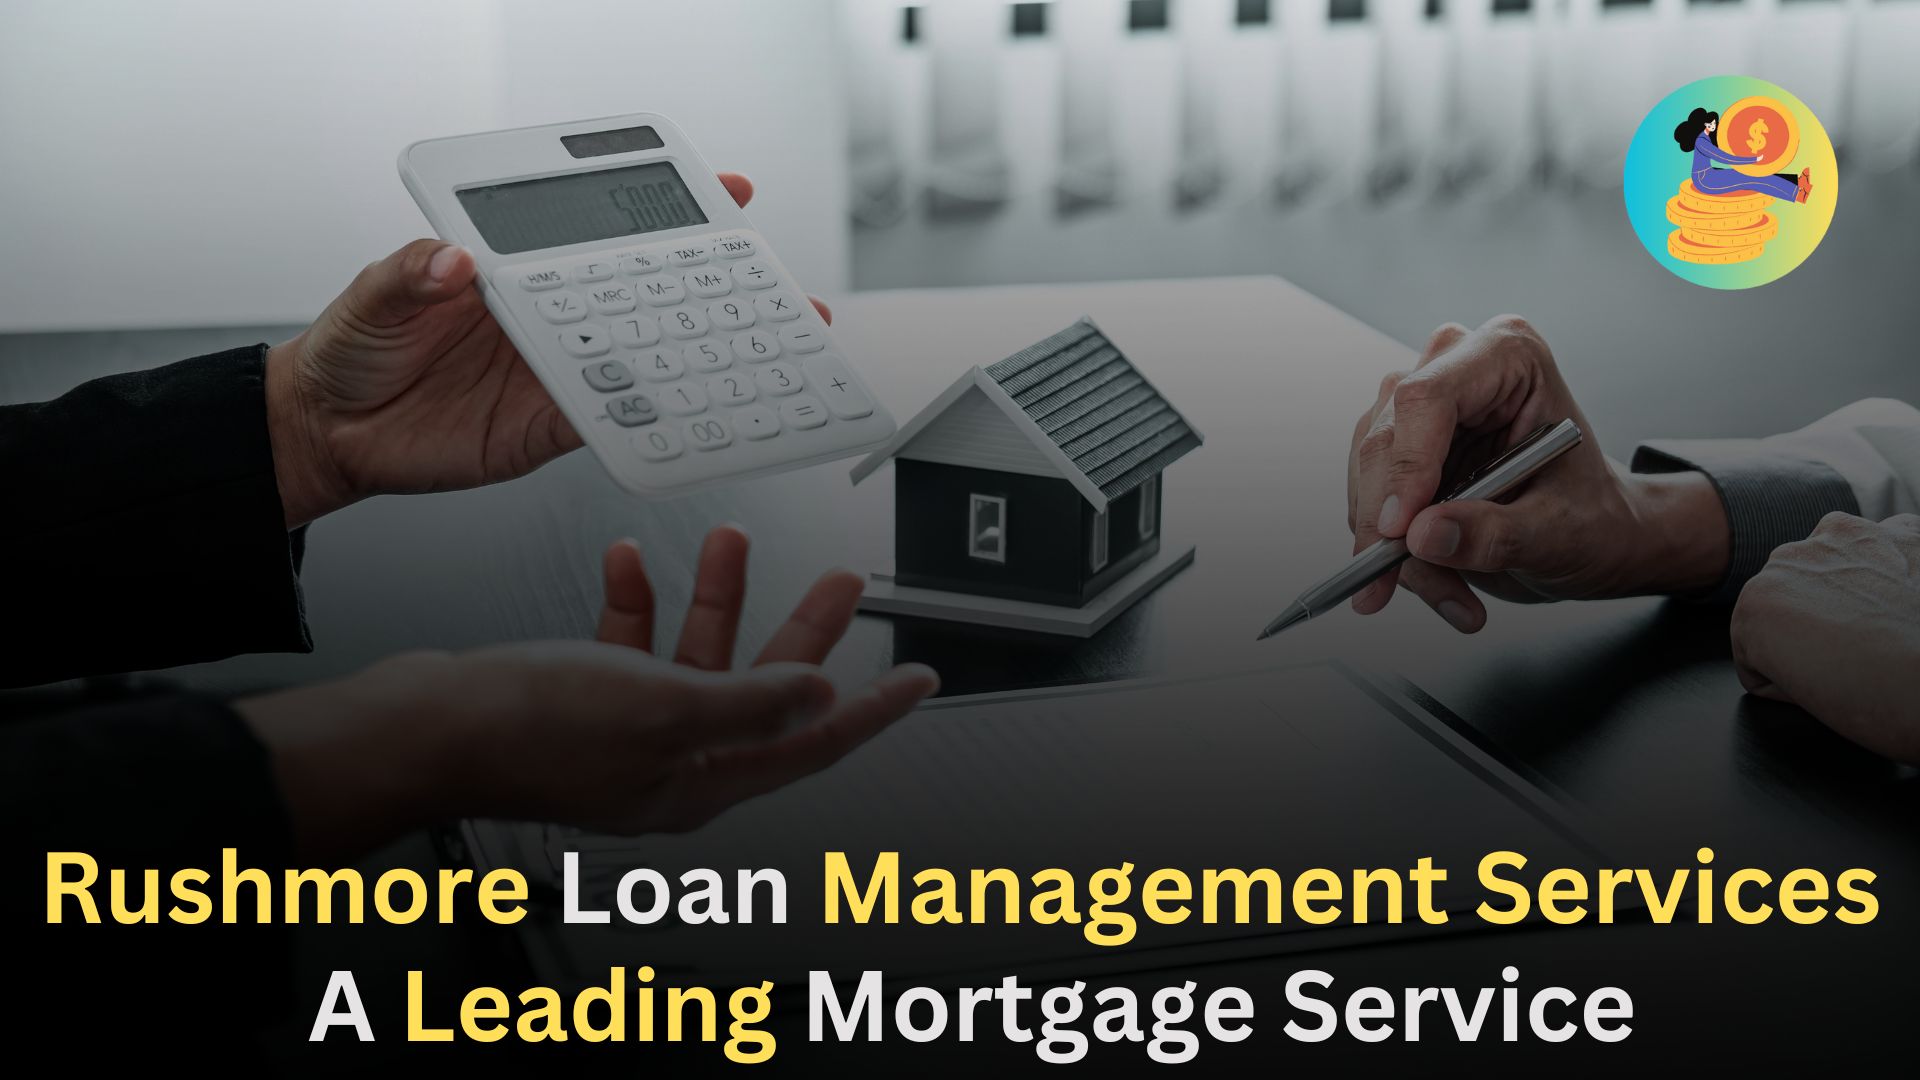 Rushmore Loan Management Services,a Leading Mortgage Service